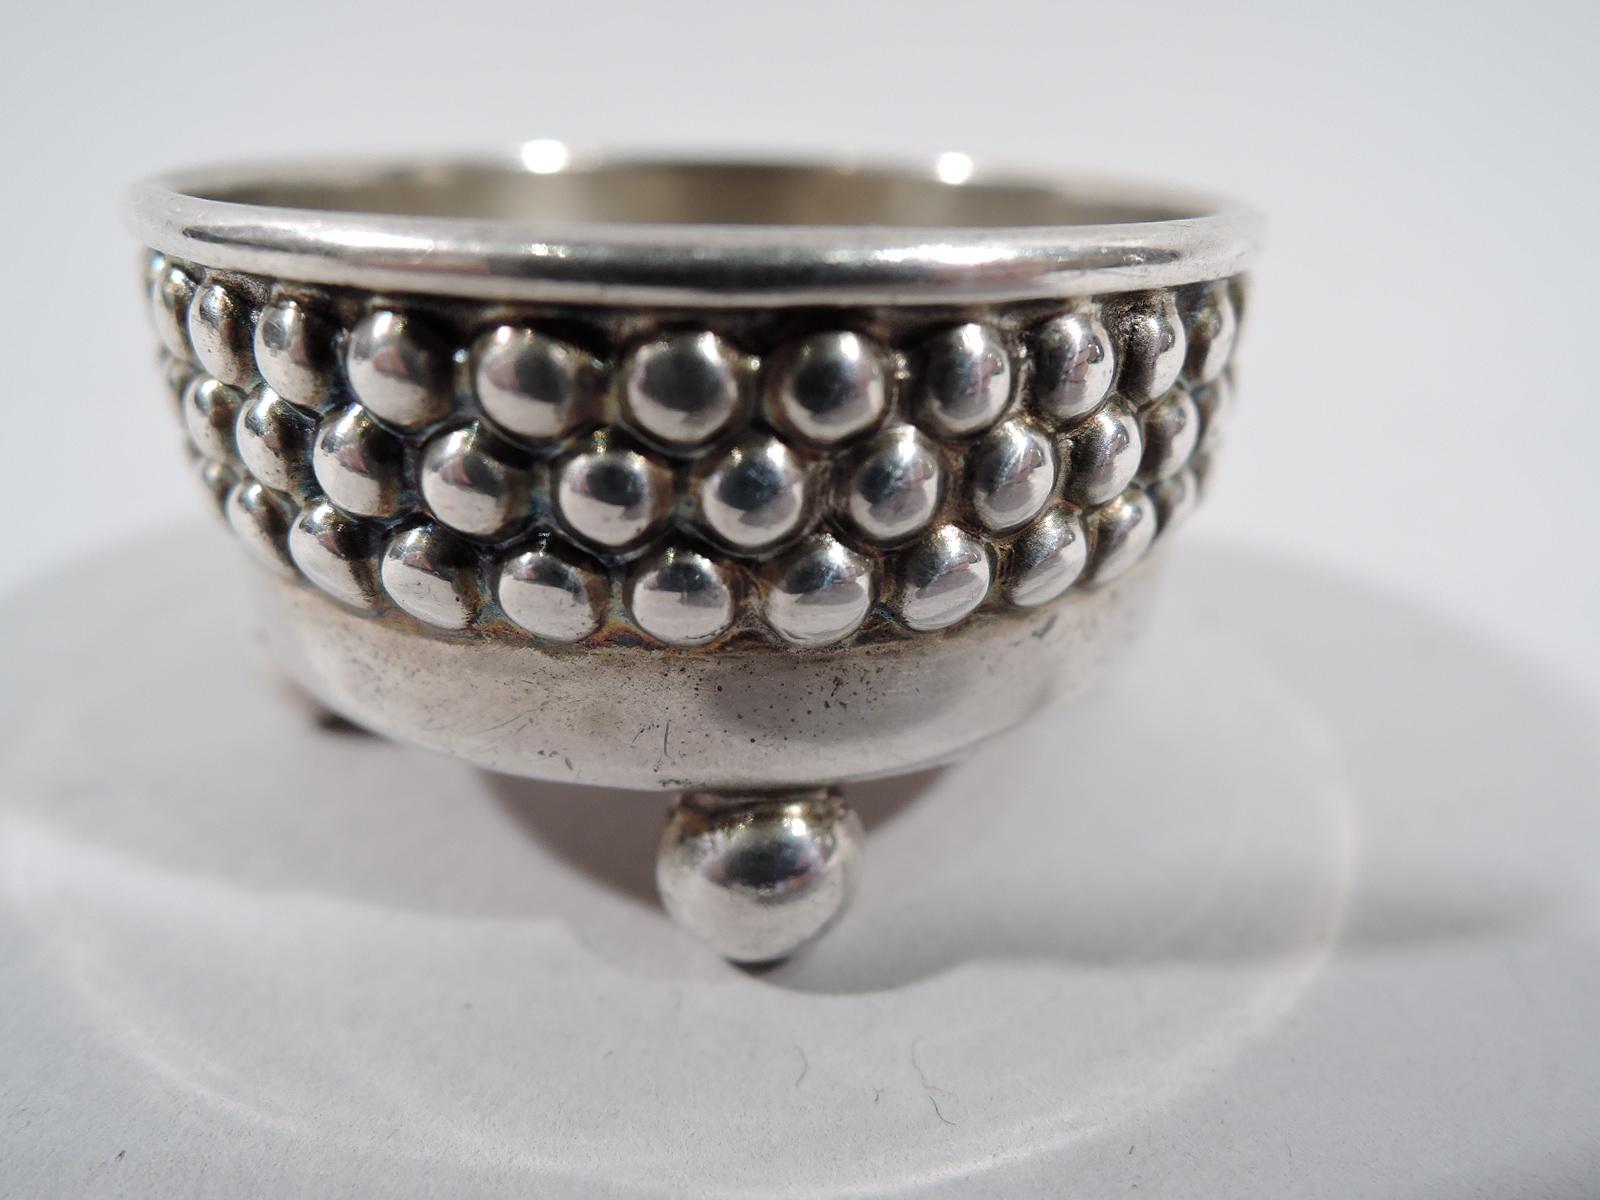 Pair of Victorian modern sterling silver open salts. Made by Tiffany & Co. in New York. Each: Round with straight sides and 4 ball supports. Sides exterior have three rows of beading, suggestive of ball bearings. An unusual design with an industrial